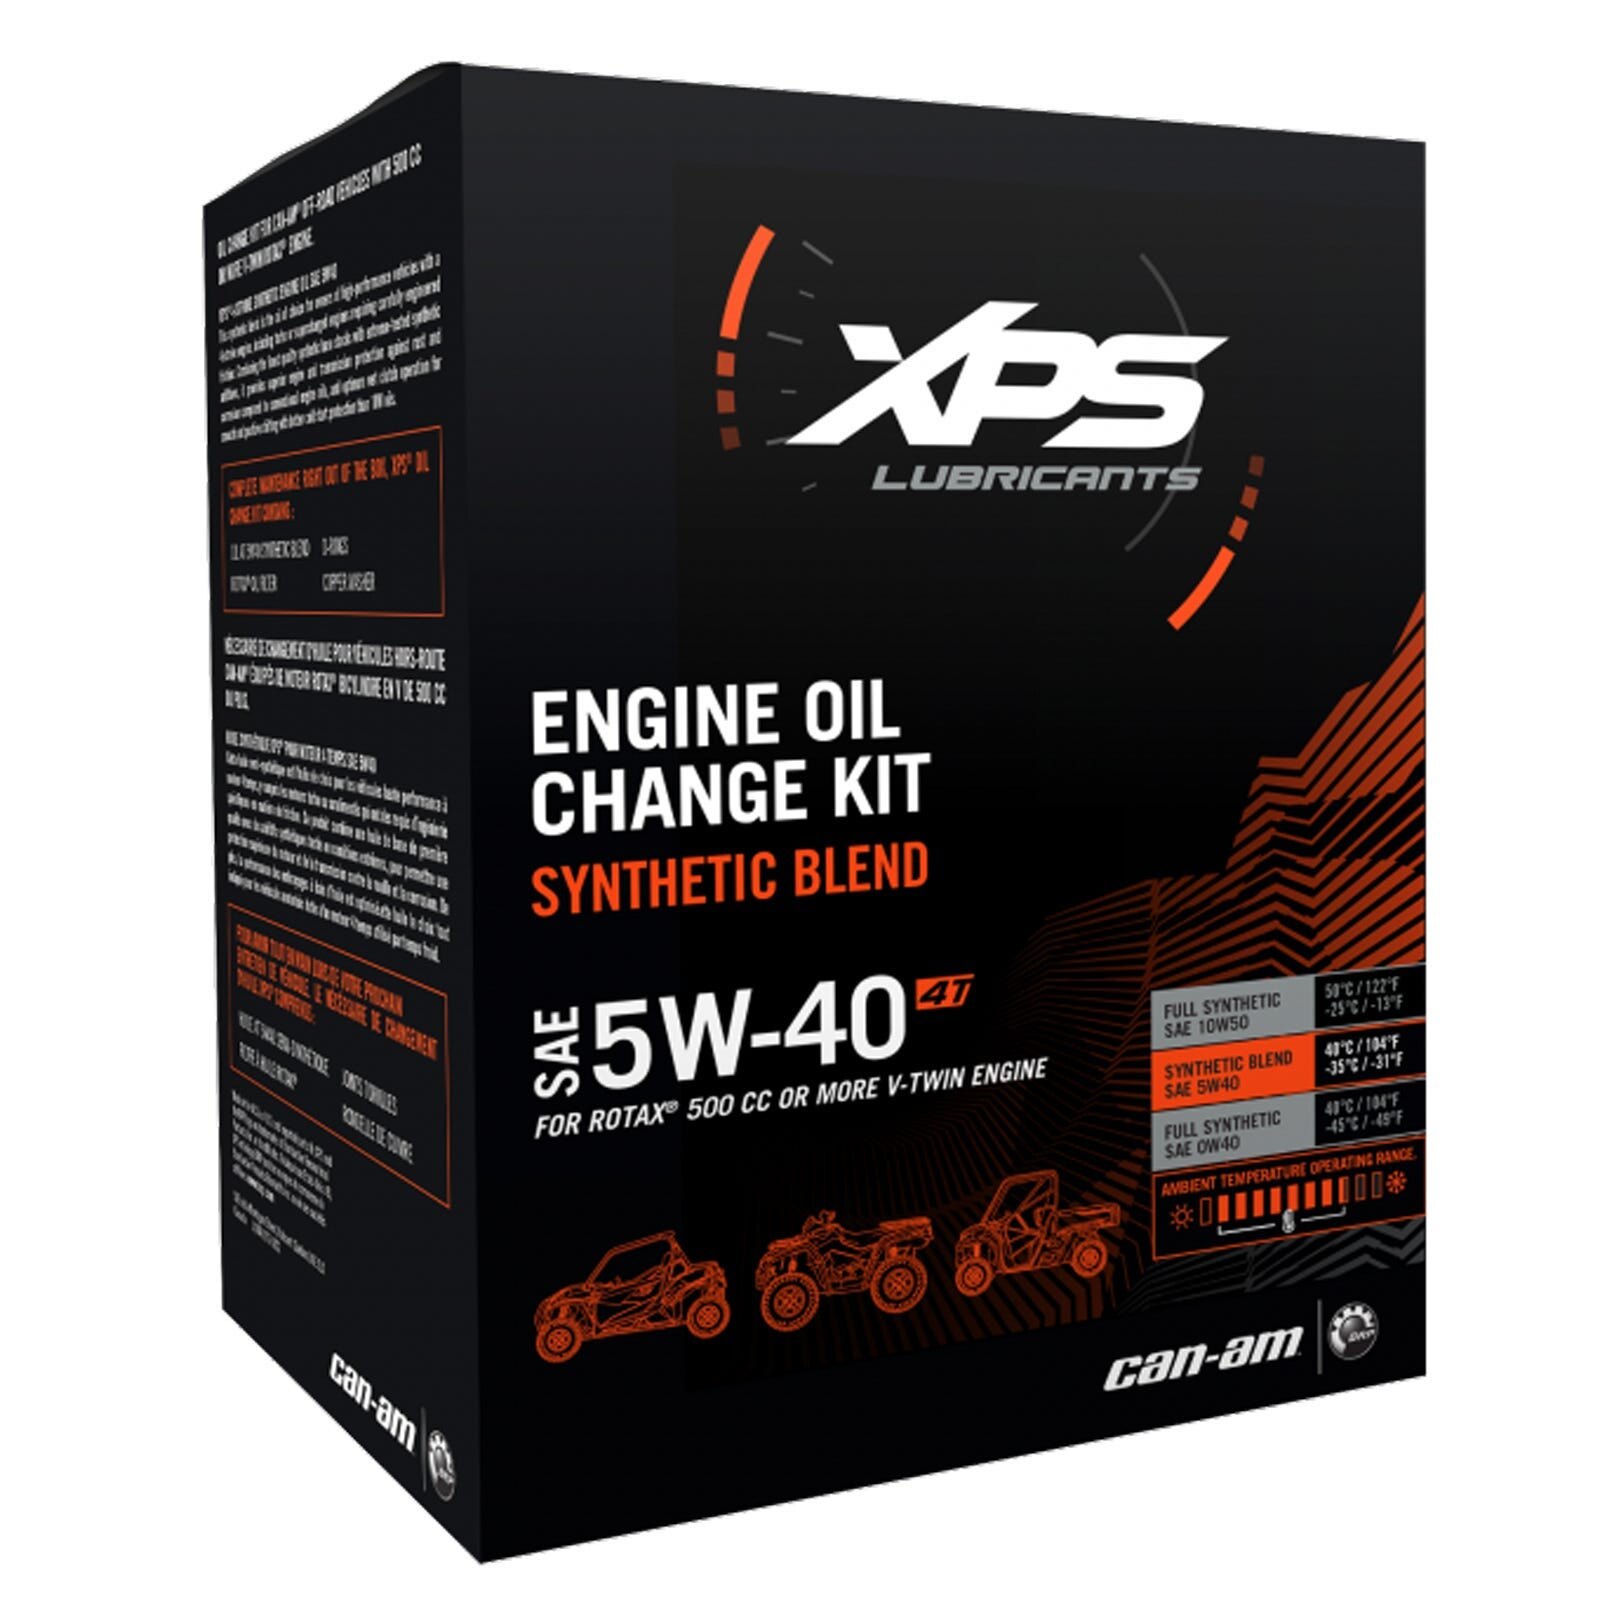 4T 5W 40 Synthetic Blend Oil Change Kit for Rotax 500 cc or more V Twin engine